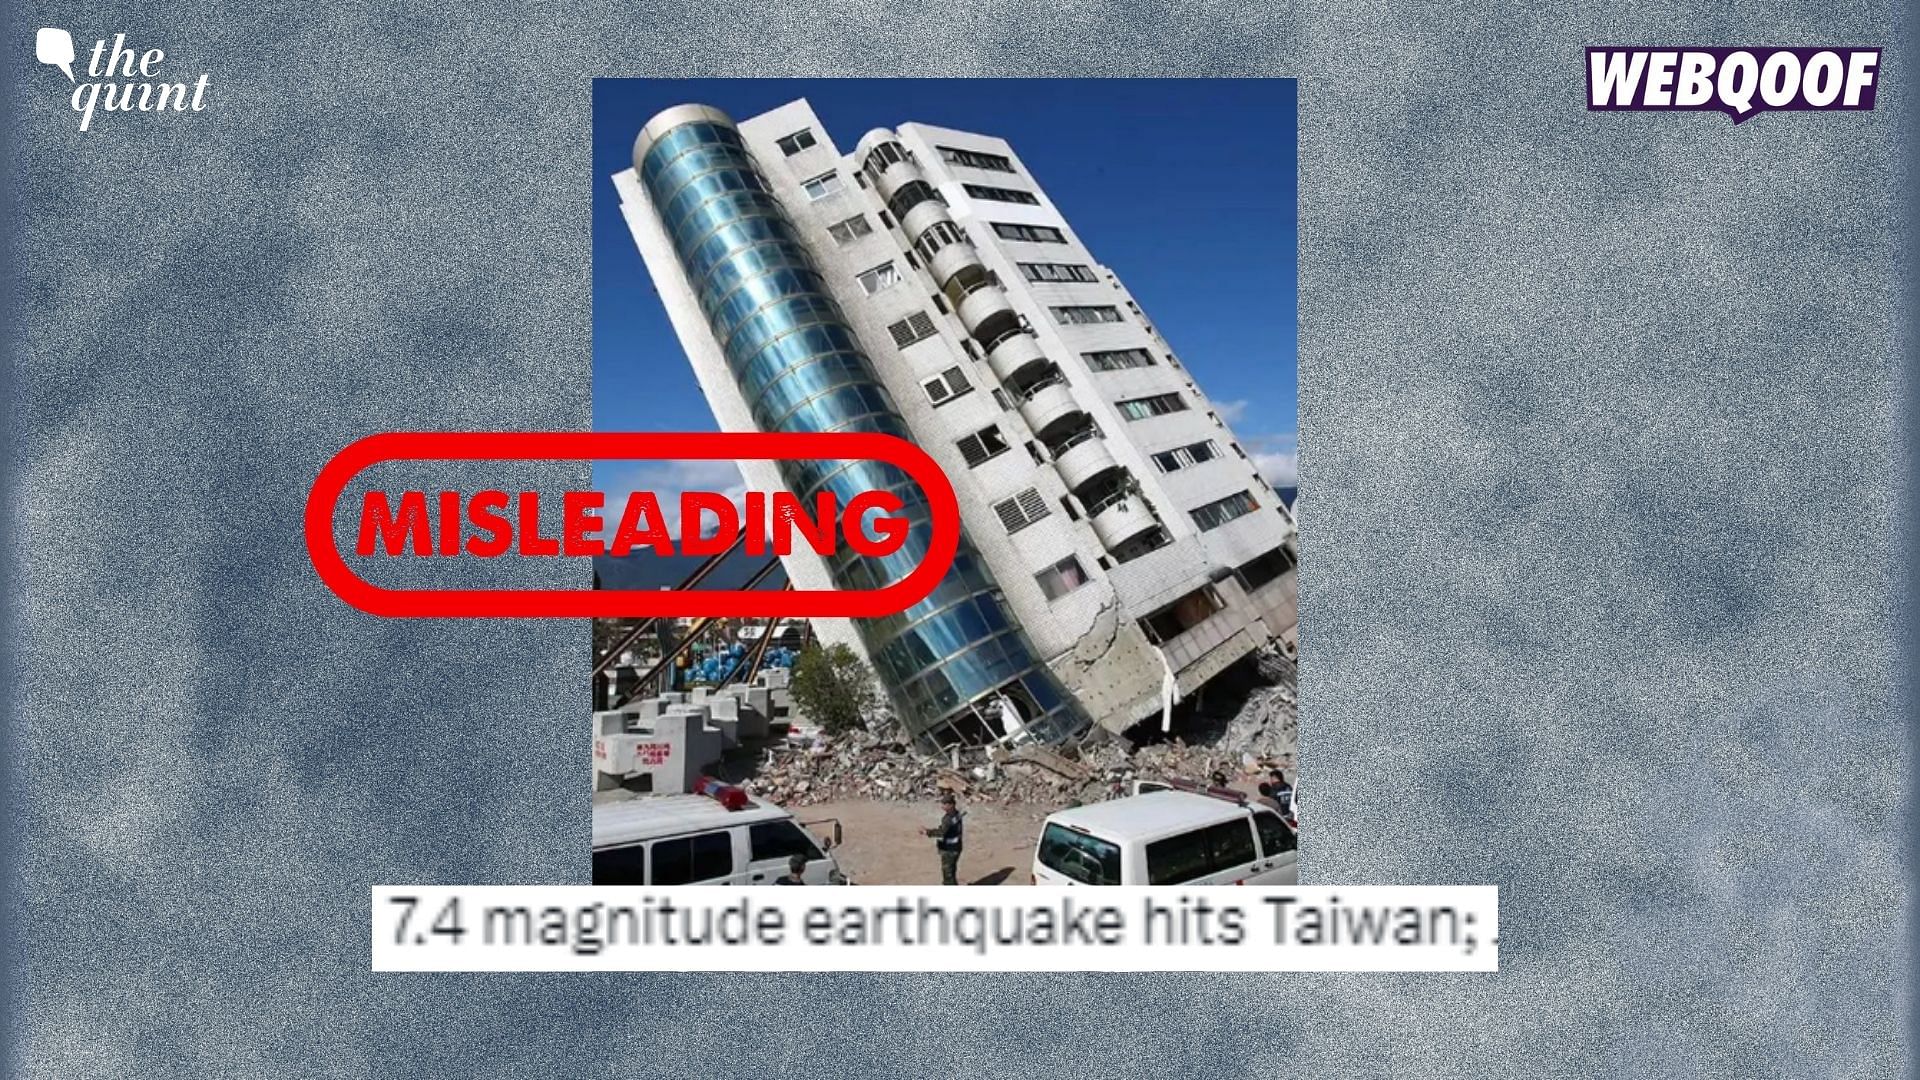 <div class="paragraphs"><p>Fact-Check: The image is from the 2018 earthquake that hit Taiwan.</p></div>